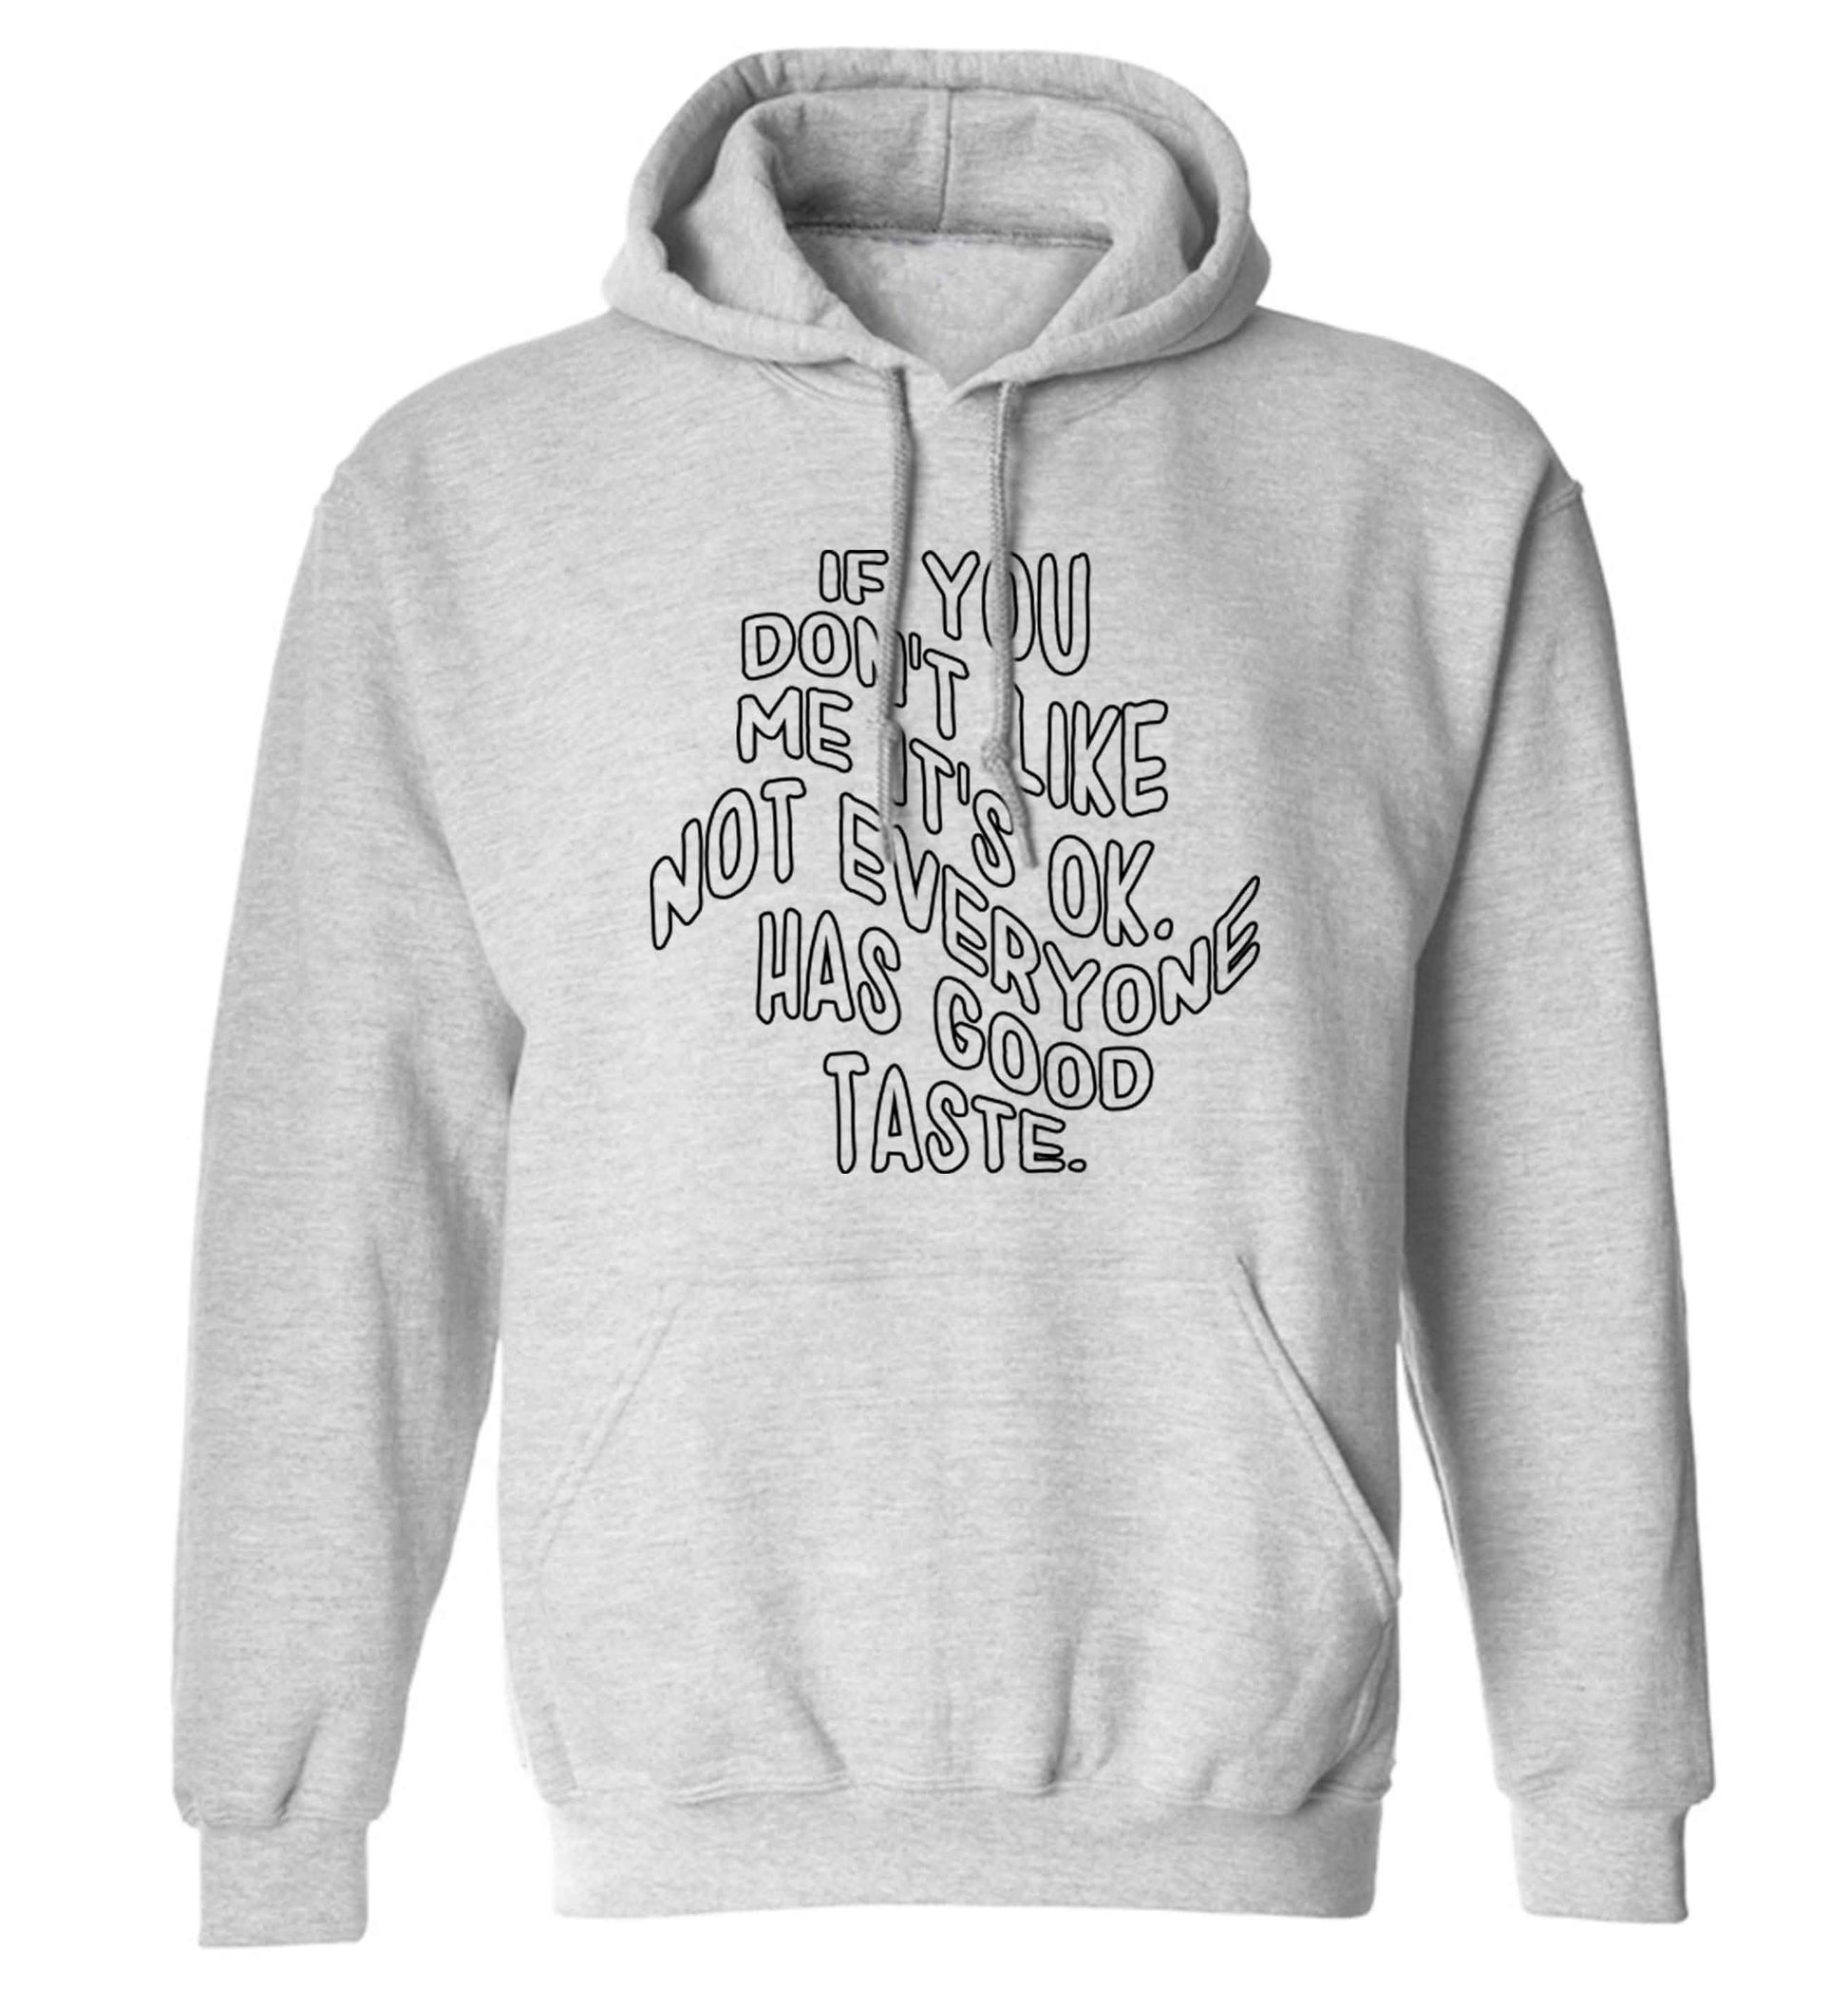 If you don't like me it's ok not everyone has good taste adults unisex grey hoodie 2XL